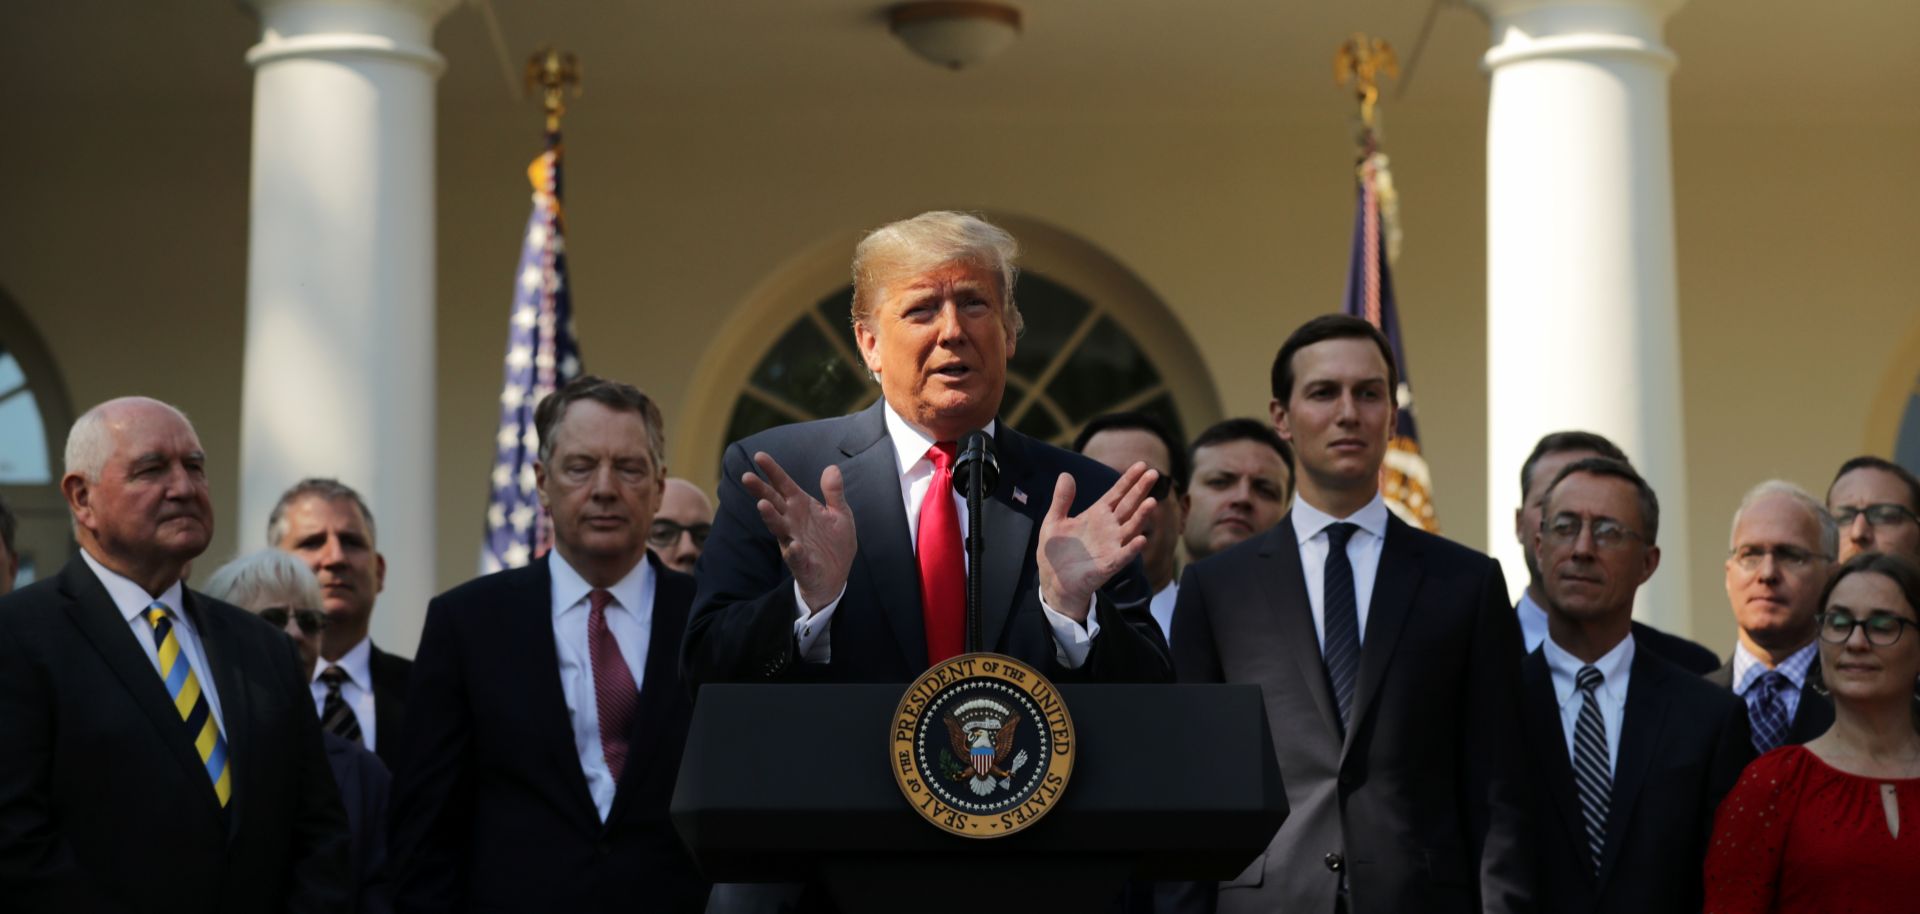 U.S. President Donald Trump speaks during a press conference to discuss a revised U.S. trade agreement with Mexico and Canada in the Rose Garden of the White House on Oct. 1, Washington, DC.